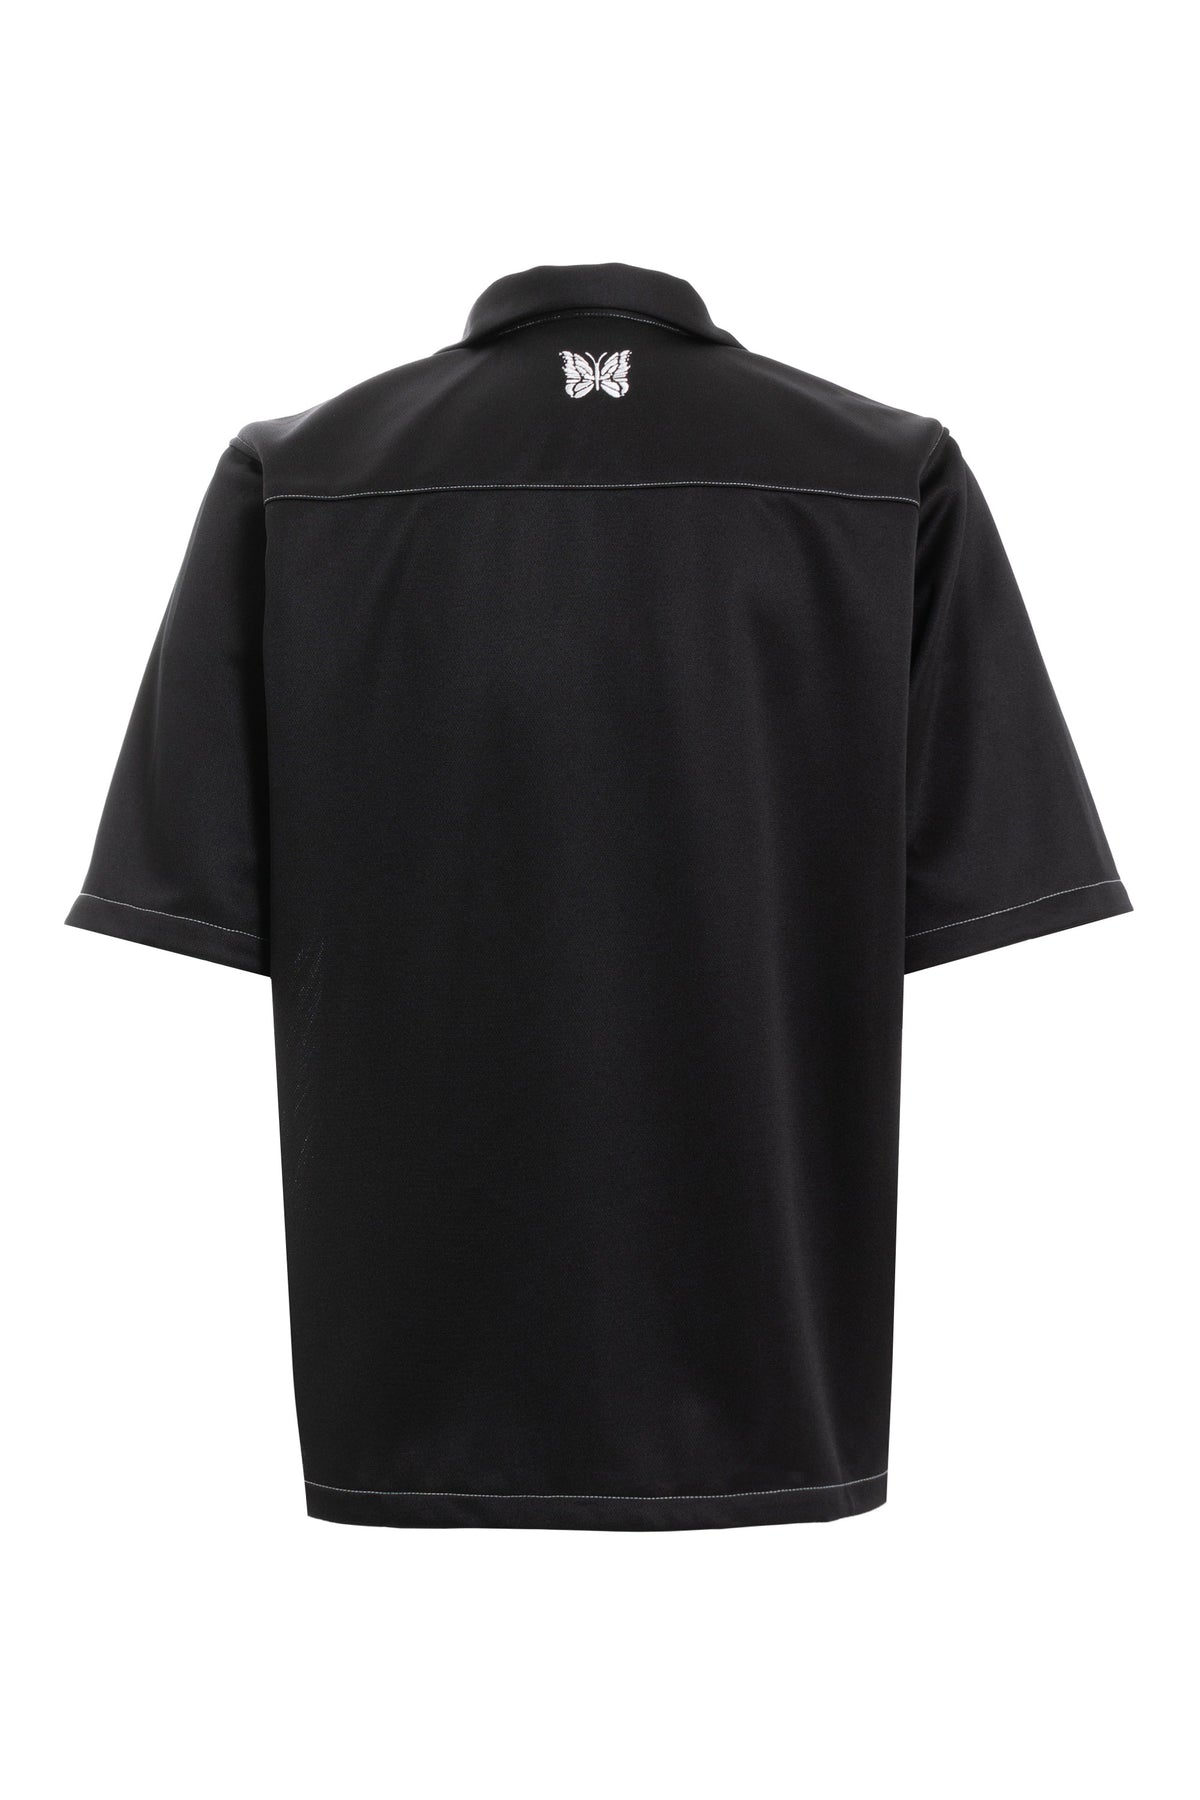 S/S TRACK SHIRT - POLY SMOOTH(EXCLUSIVE) / BLK WHT